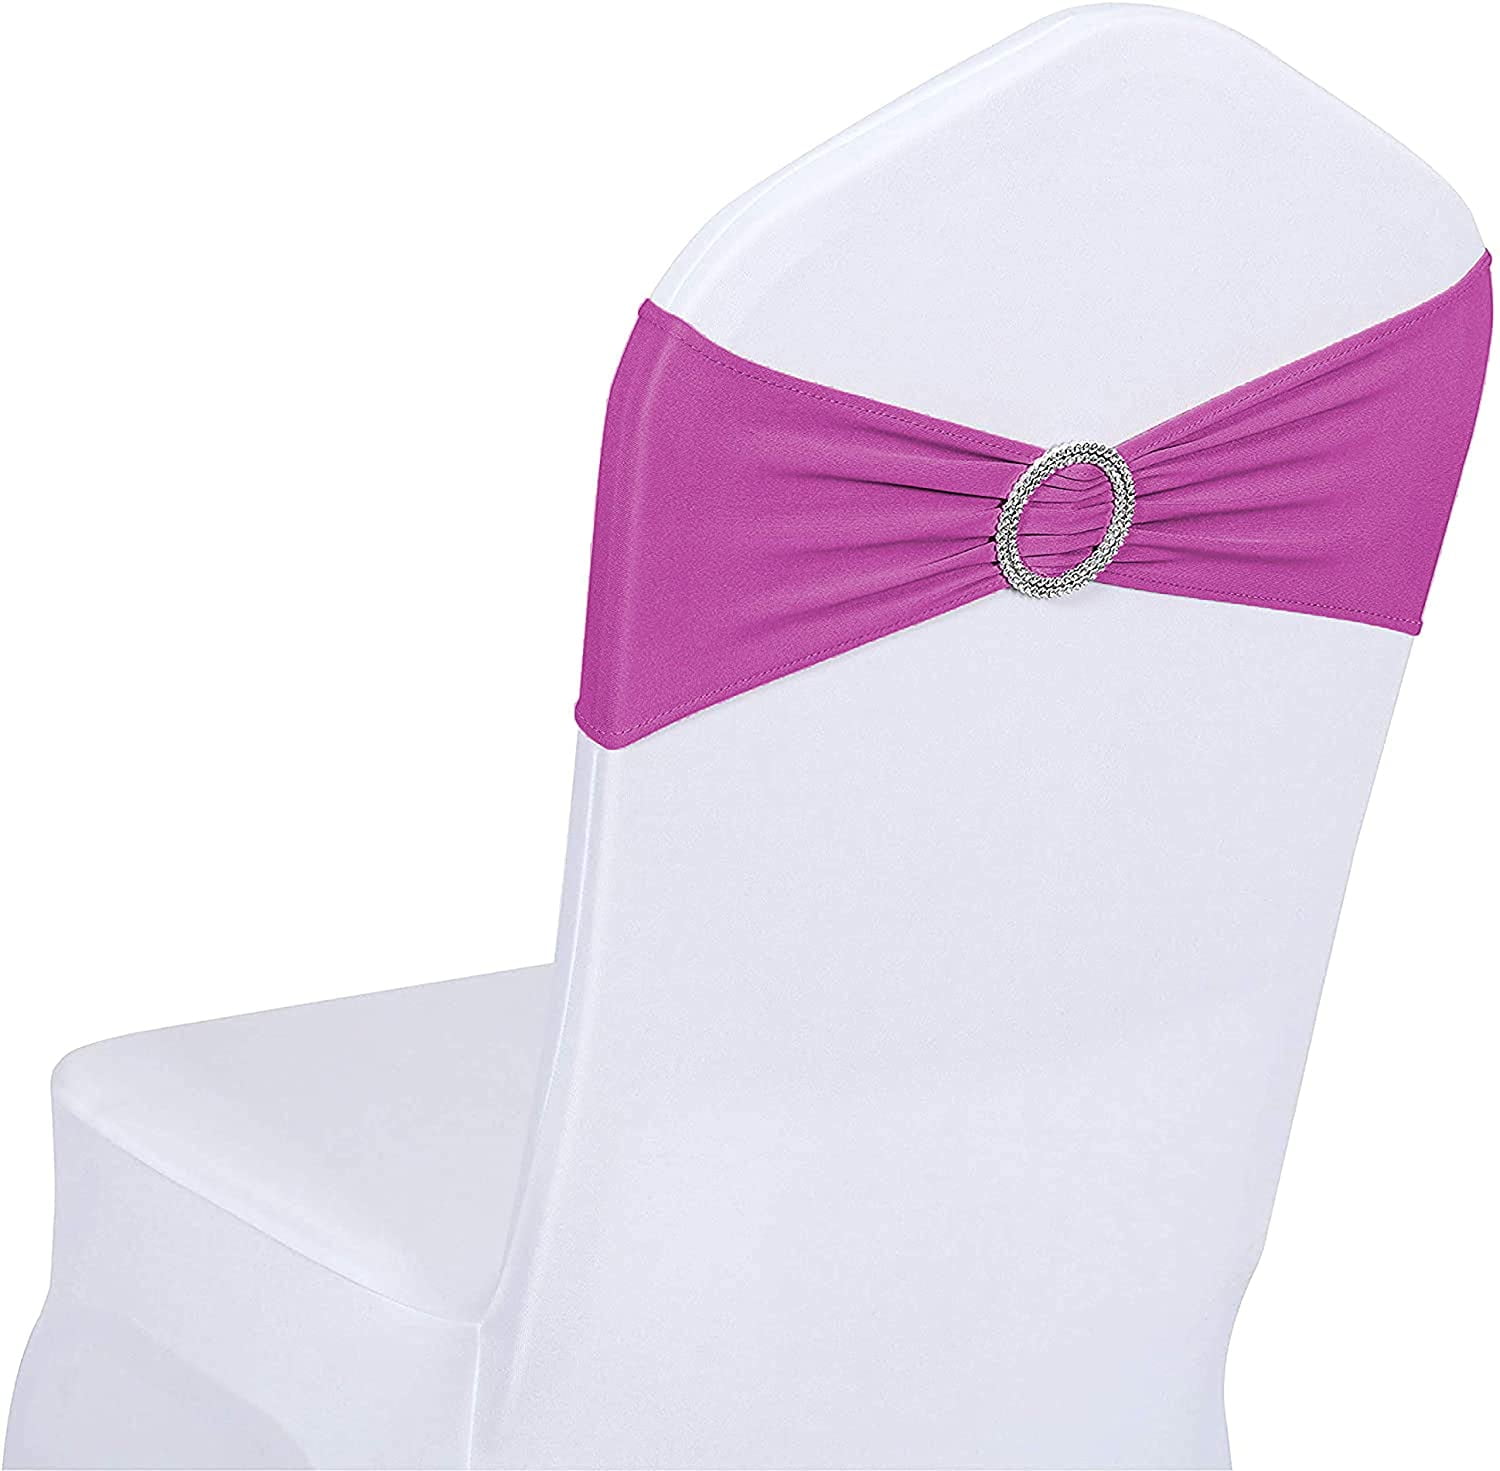 Spandex Stretch Tie Chair Band Sash Wedding Party Cover Cloth Buckle Bow Slider 